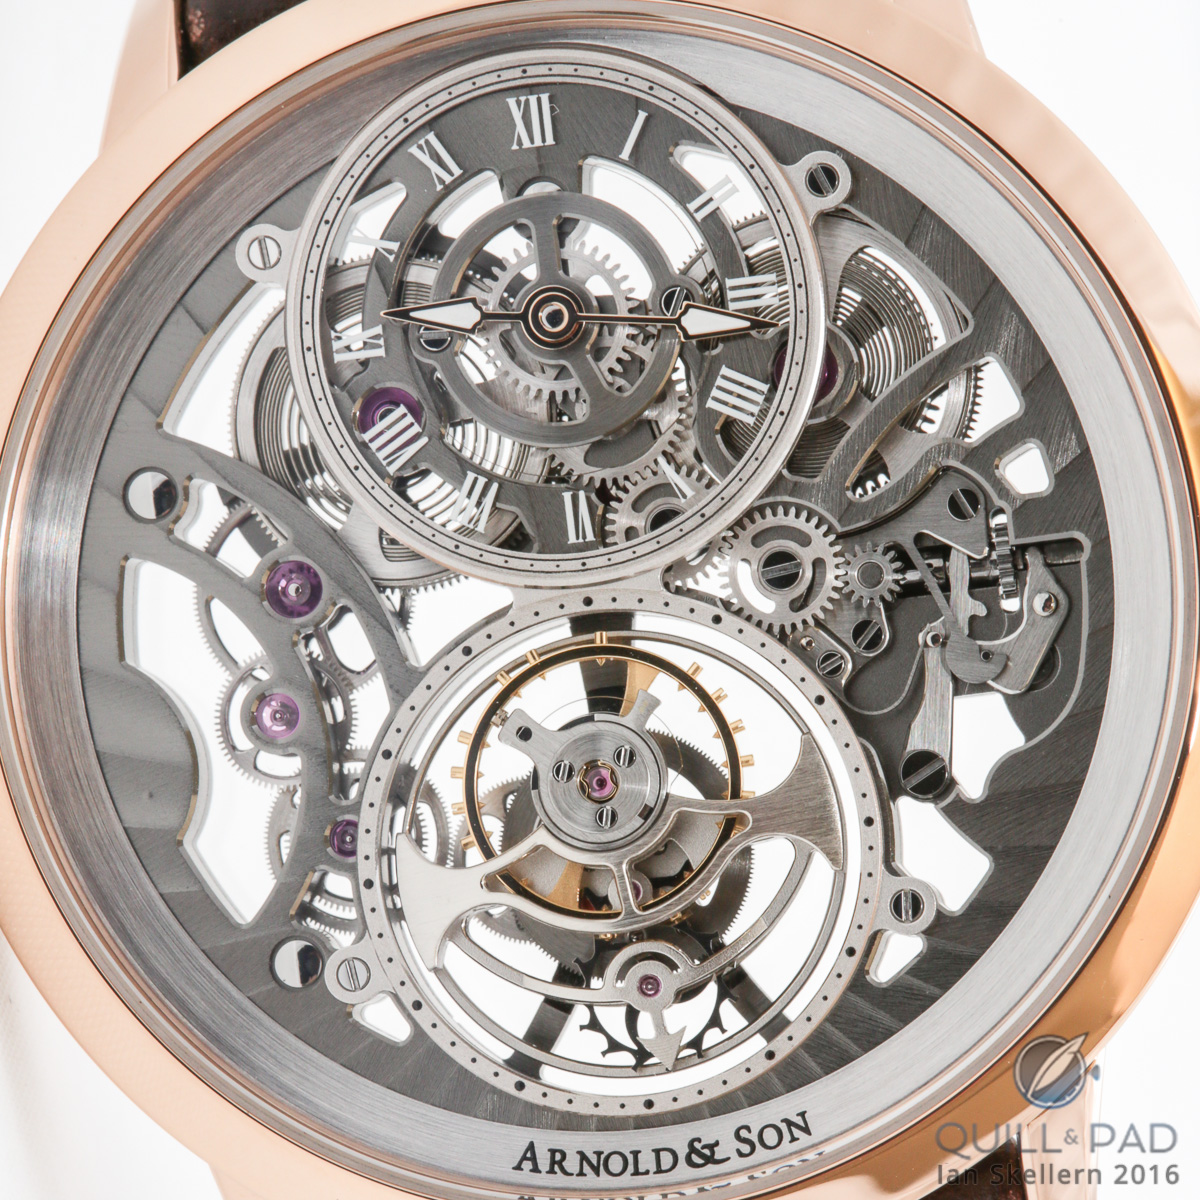 The Ute’s A Beaute:Hight Quality Replica Watch Arnold & Son UTTE Skeleton